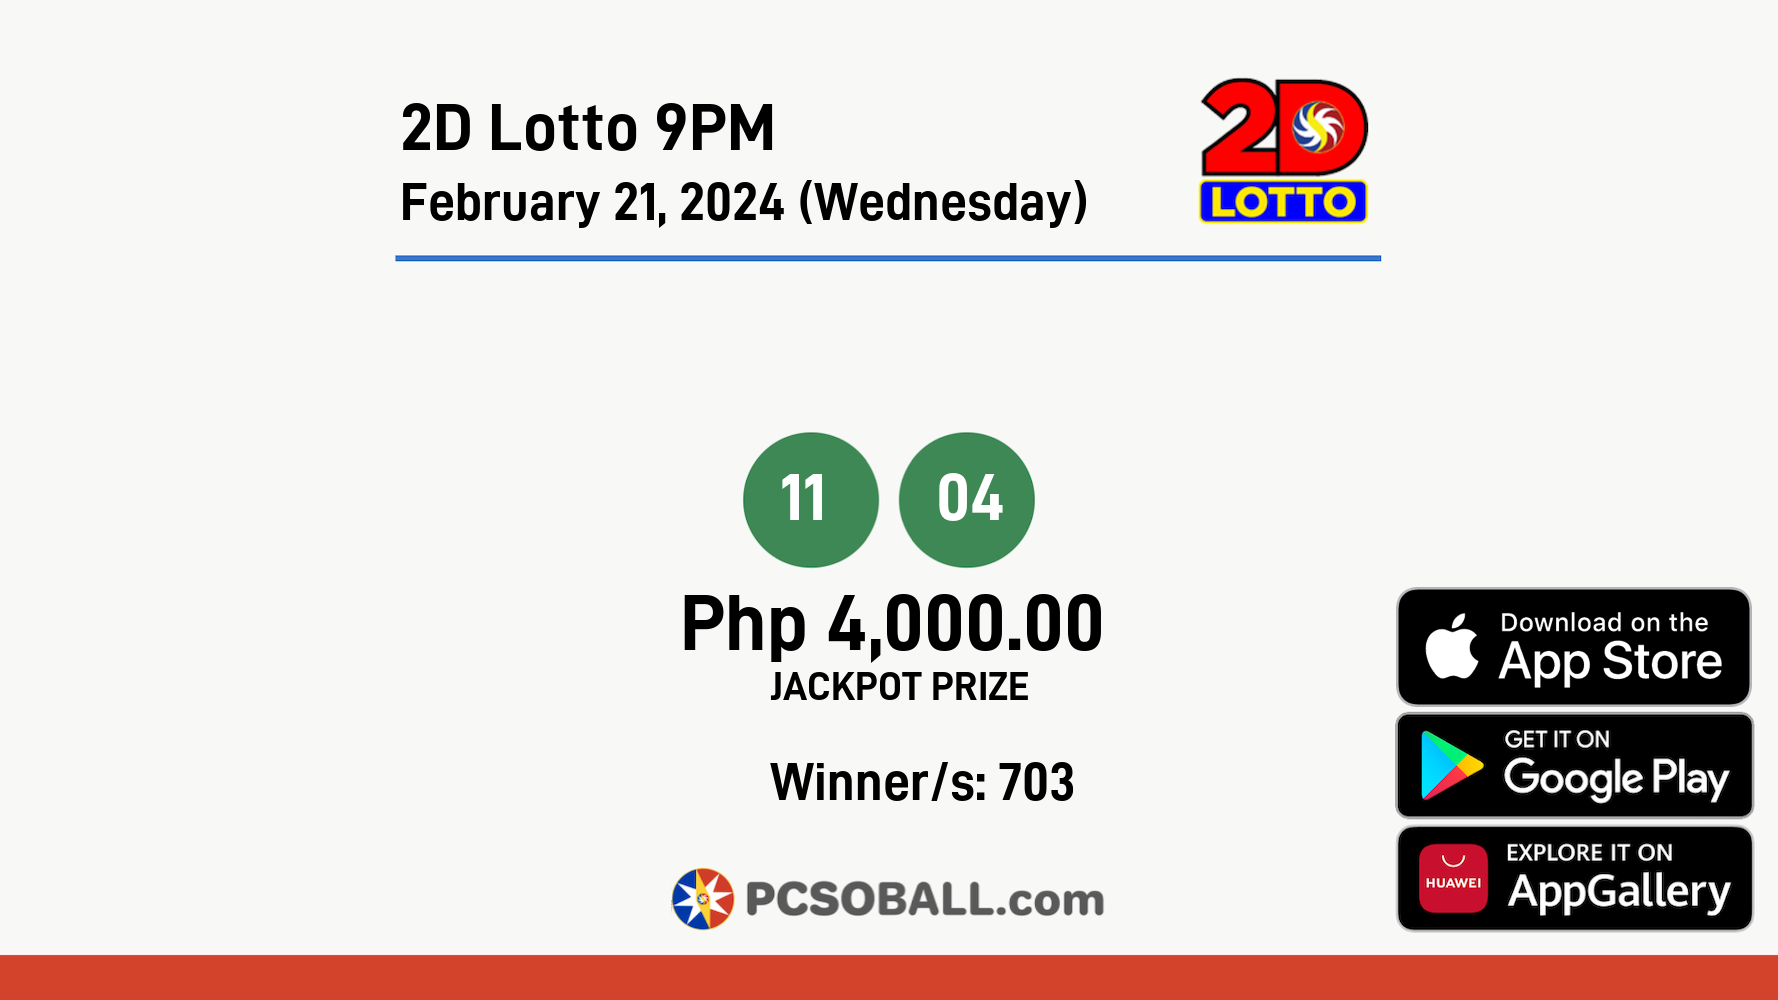 2D Lotto 9PM February 21, 2024 (Wednesday) Result